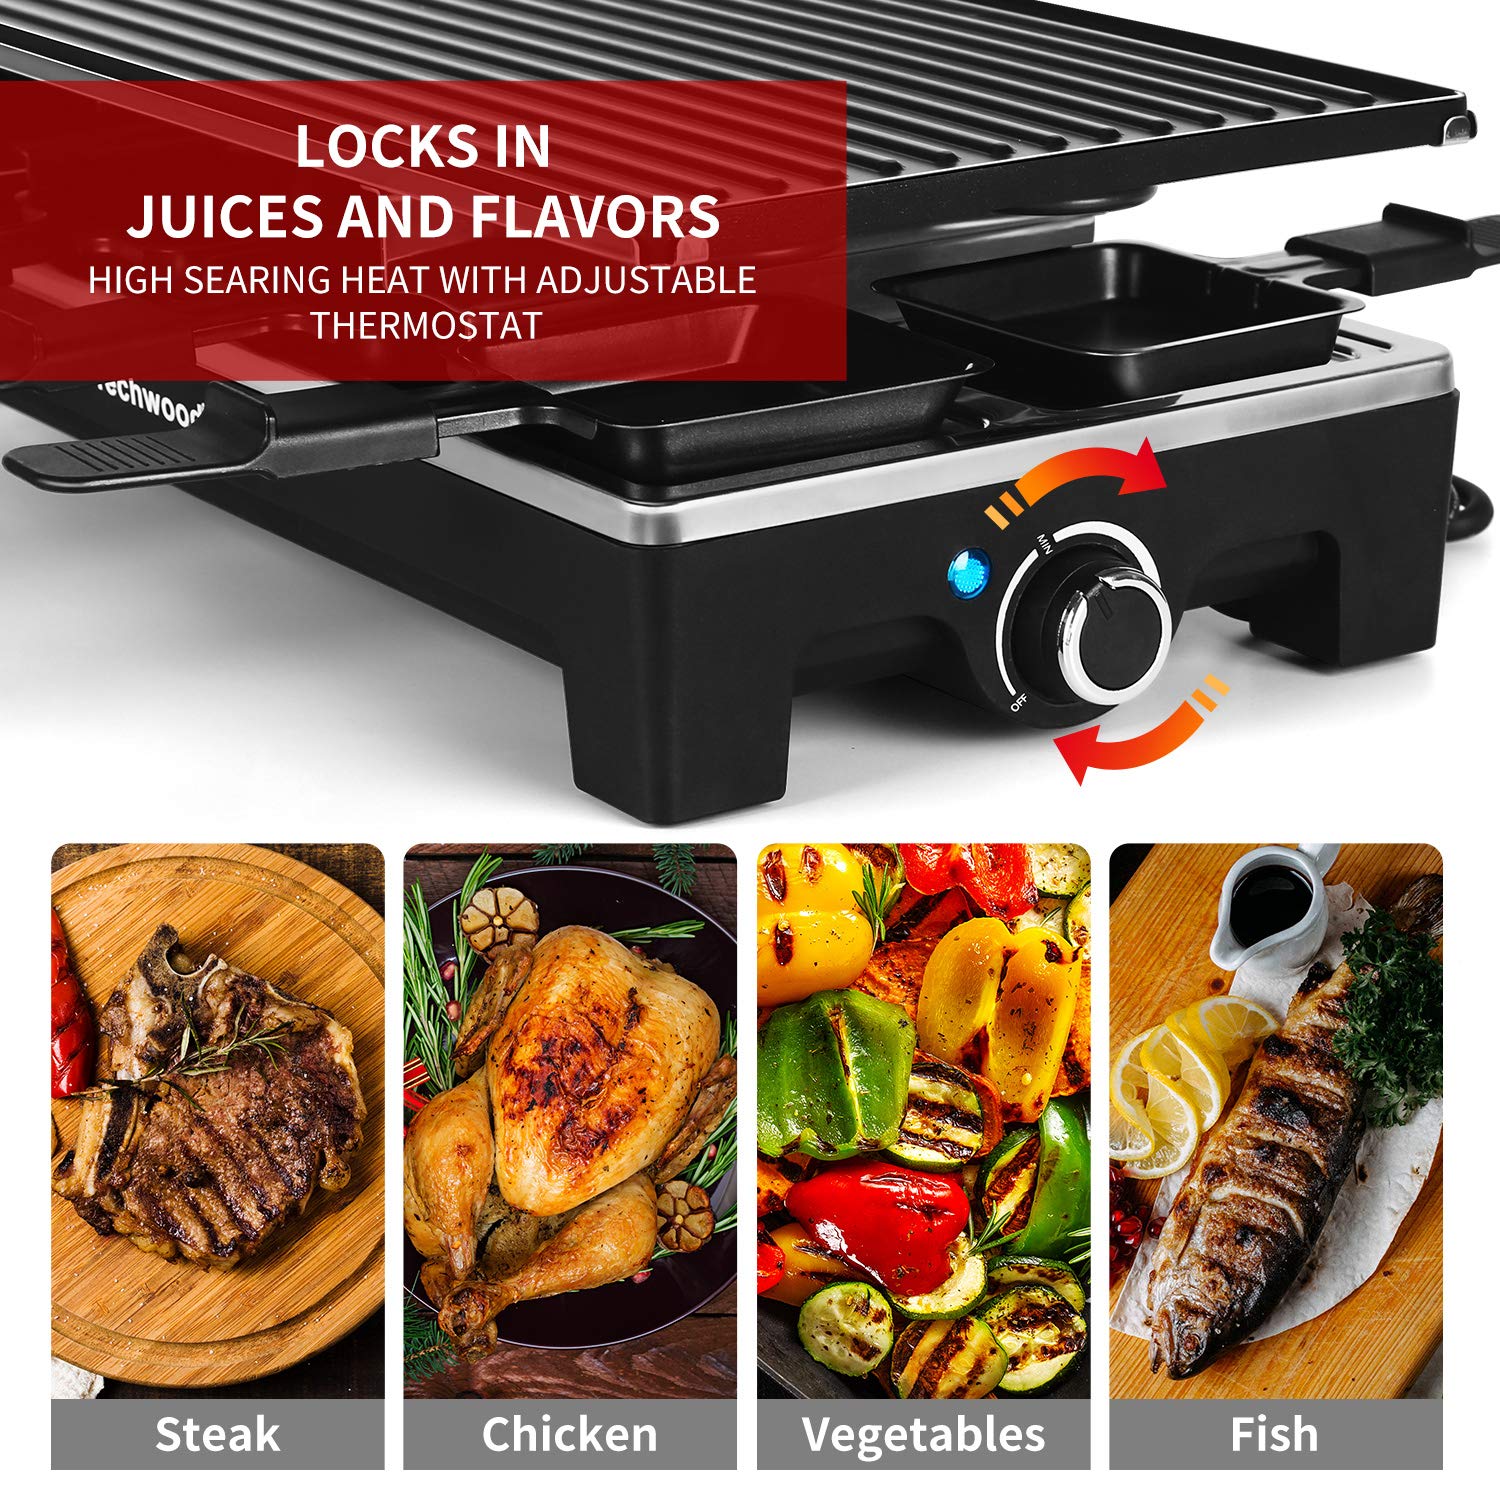 Cusimax Smokeless Indoor Electric Korean BBQ Grill with Glass Lid,1500W  Electric Grill Griddle,Non-stick Removable Grill Plate & Griddle  Plate,Adjustable Temperature,Dishwasher Safe,Stainless Steel